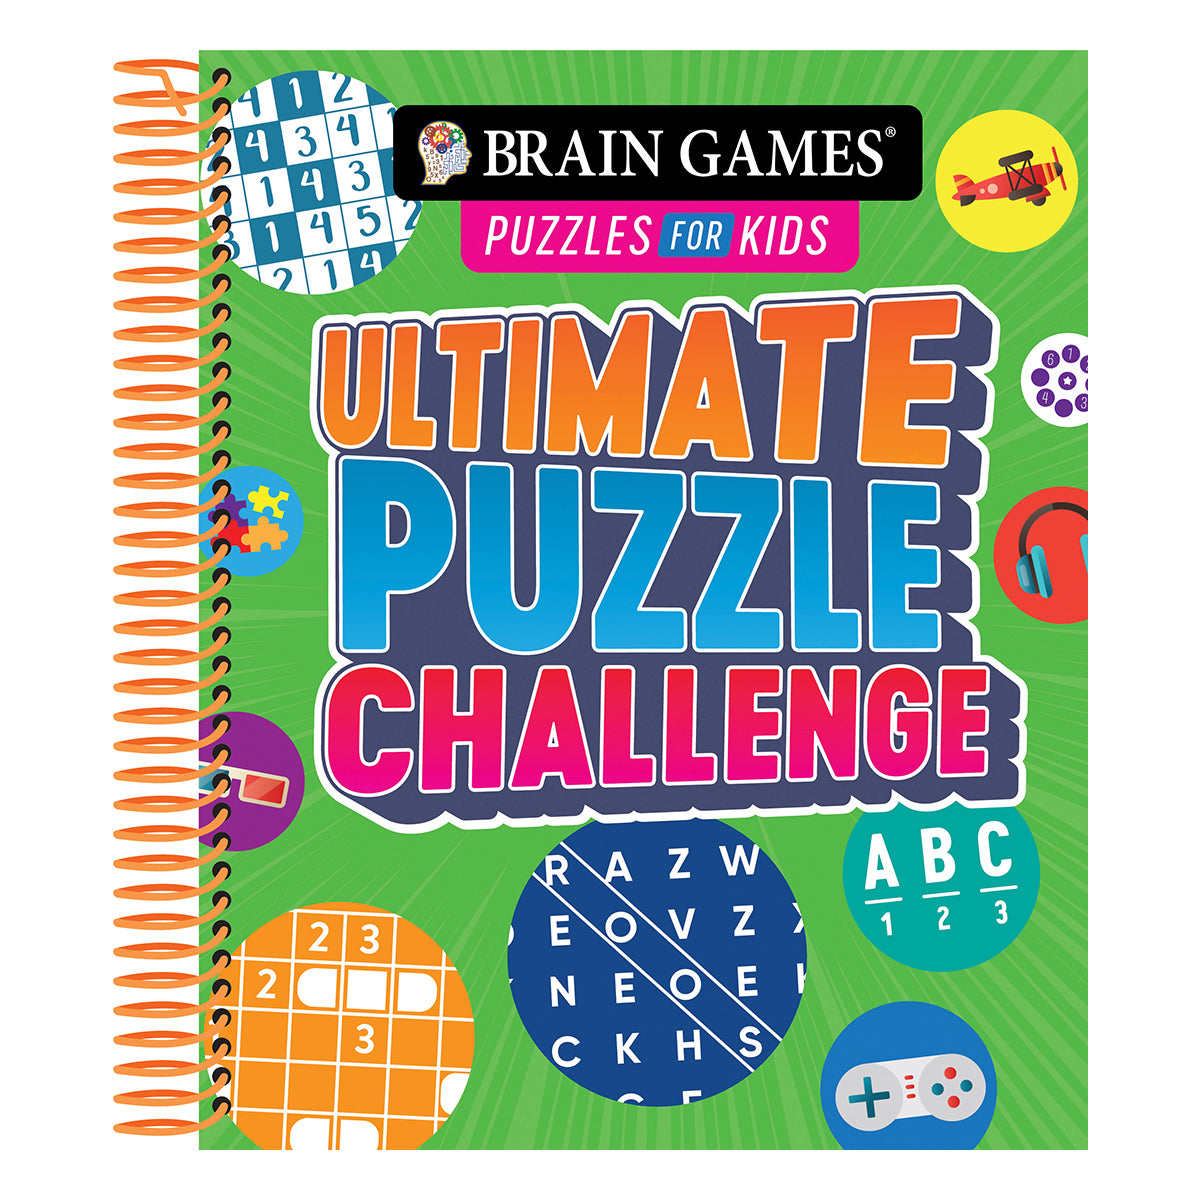 Brain Games Puzzles for Kids  Ultimate Puzzle Challenge